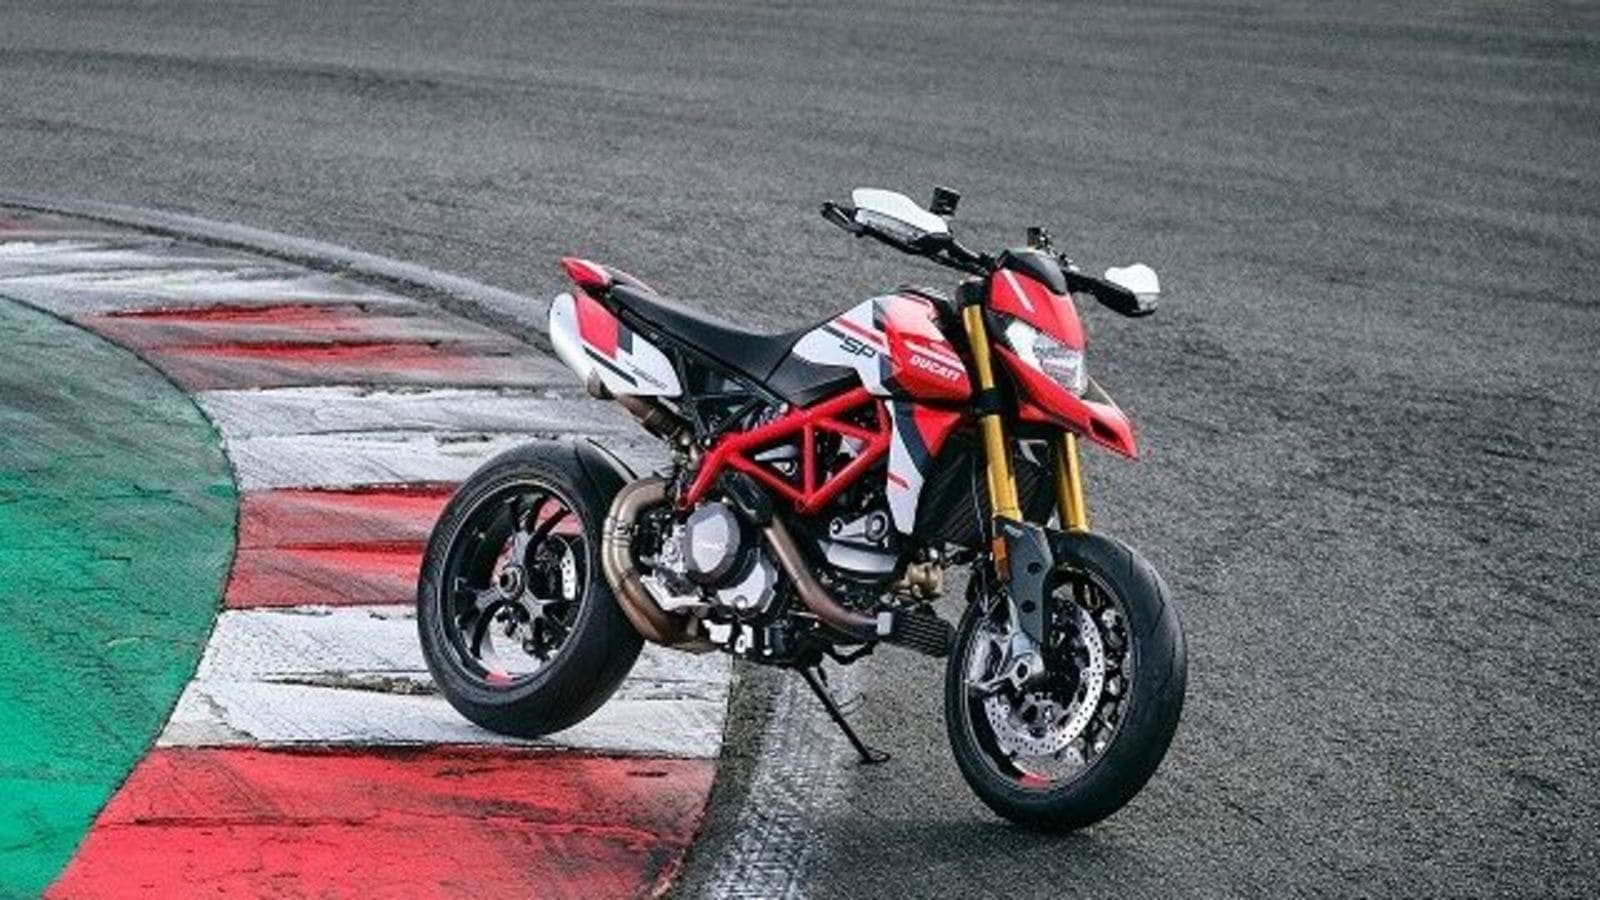 DUCATI HYPERSTRADA 821 2013on Review Specs  Prices  MCN